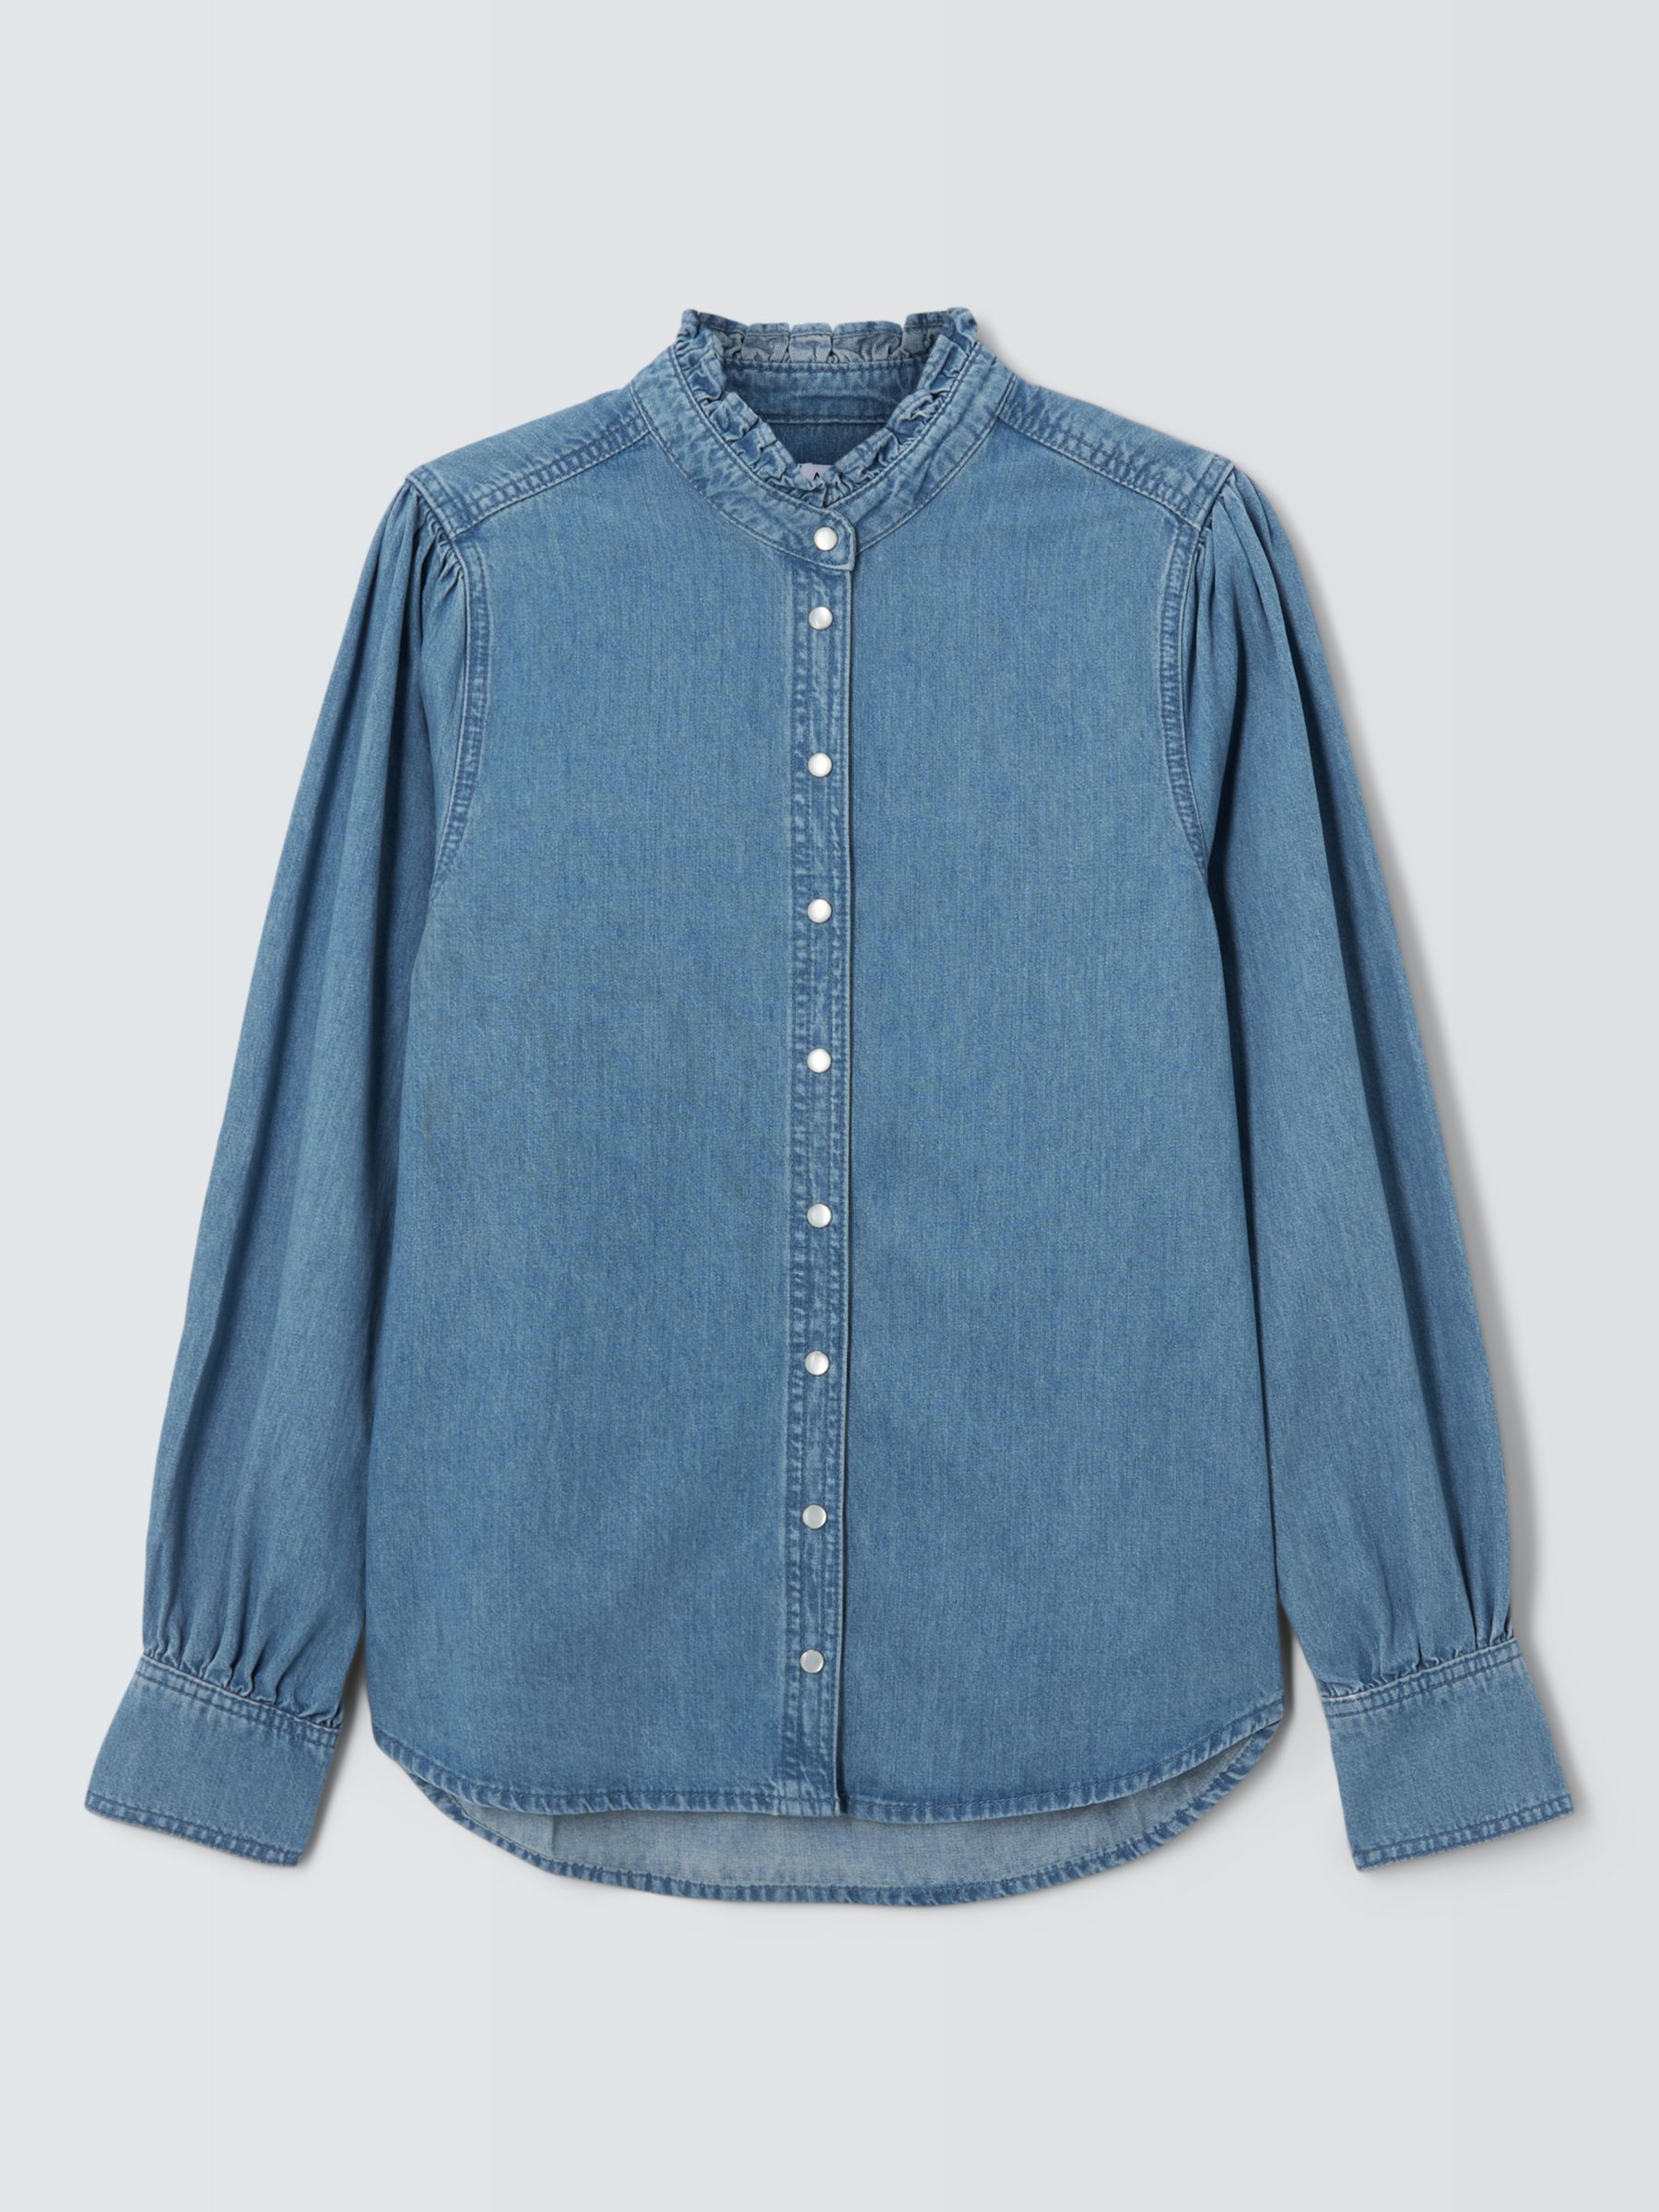 AND/OR Dempsey Frill Neck Denim Shirt, Mid Blue, 10